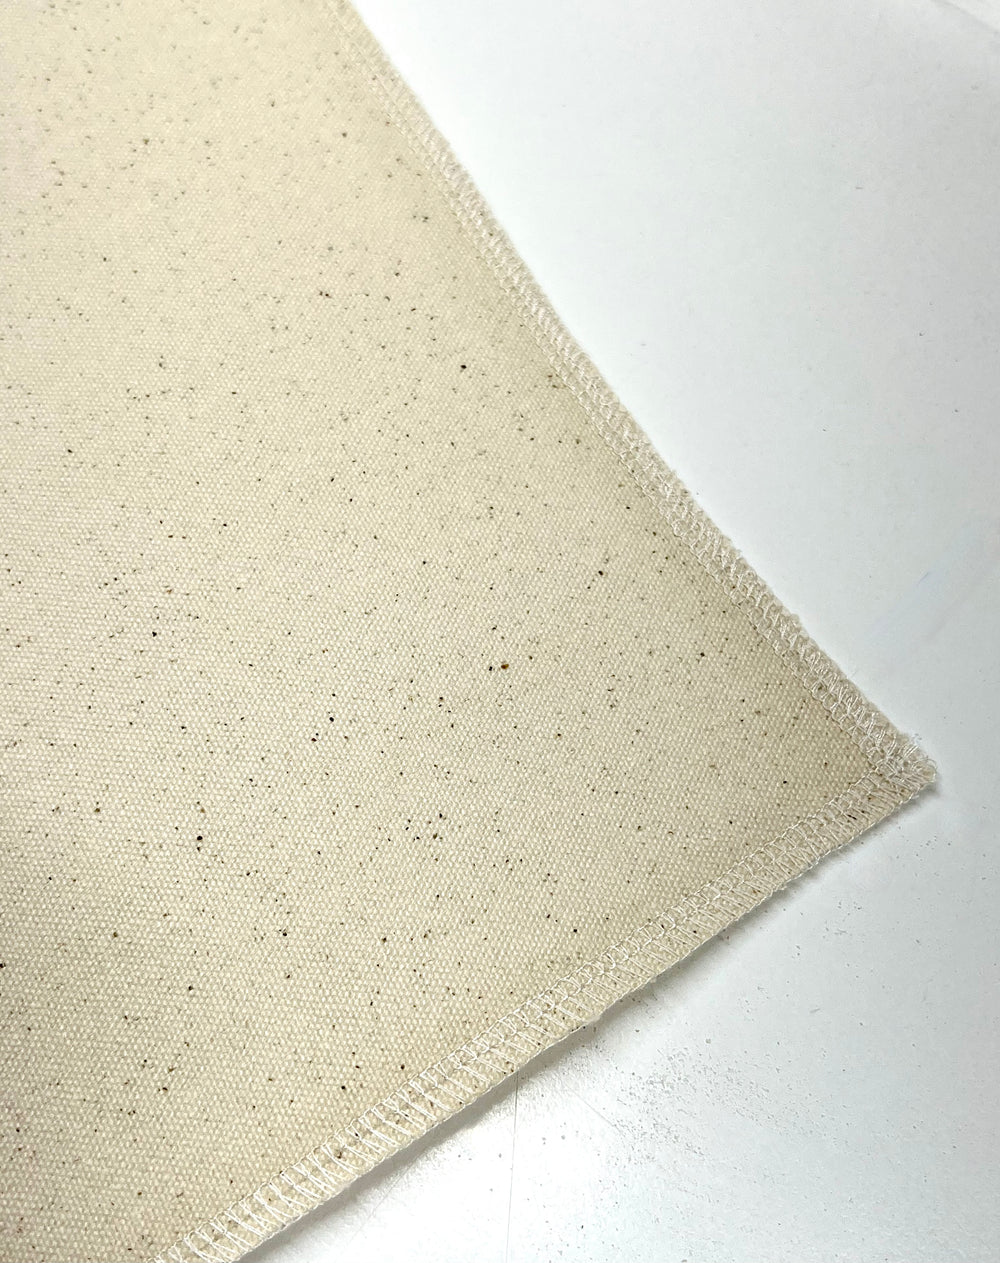 Bakers Couche Proofing Cloth